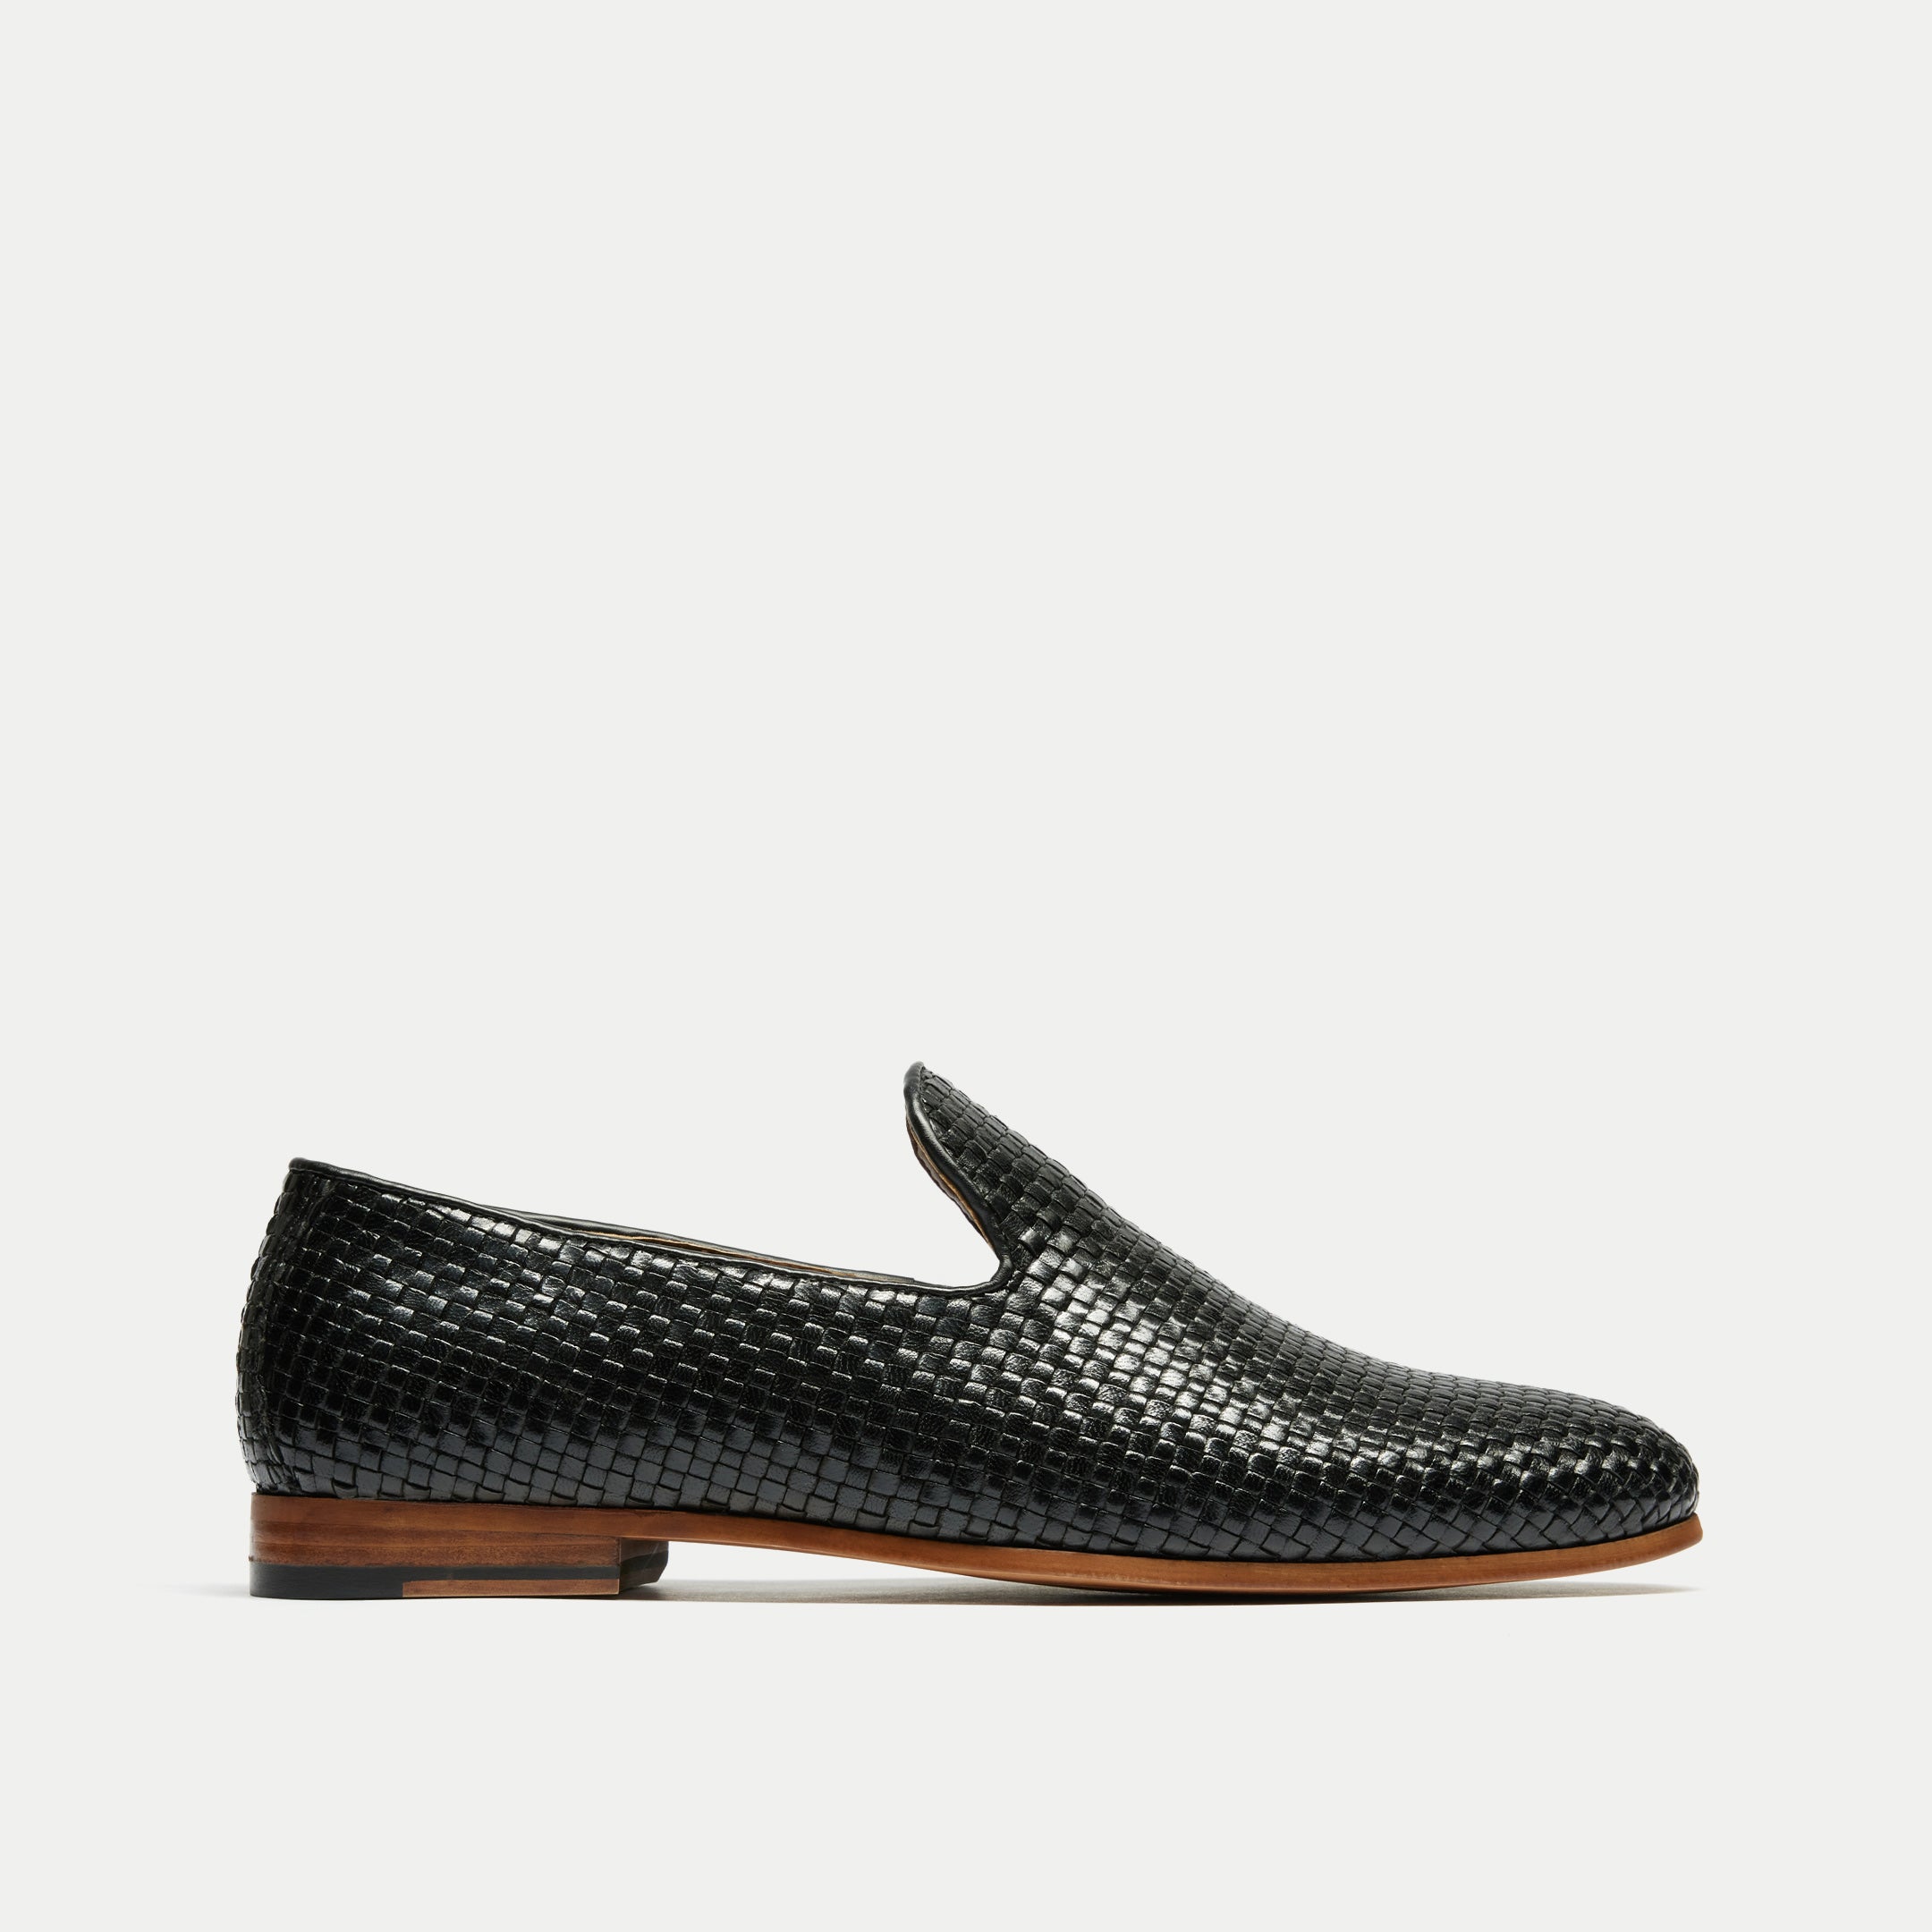 Walk London Mens Terry Weave Loafer in Black Leather